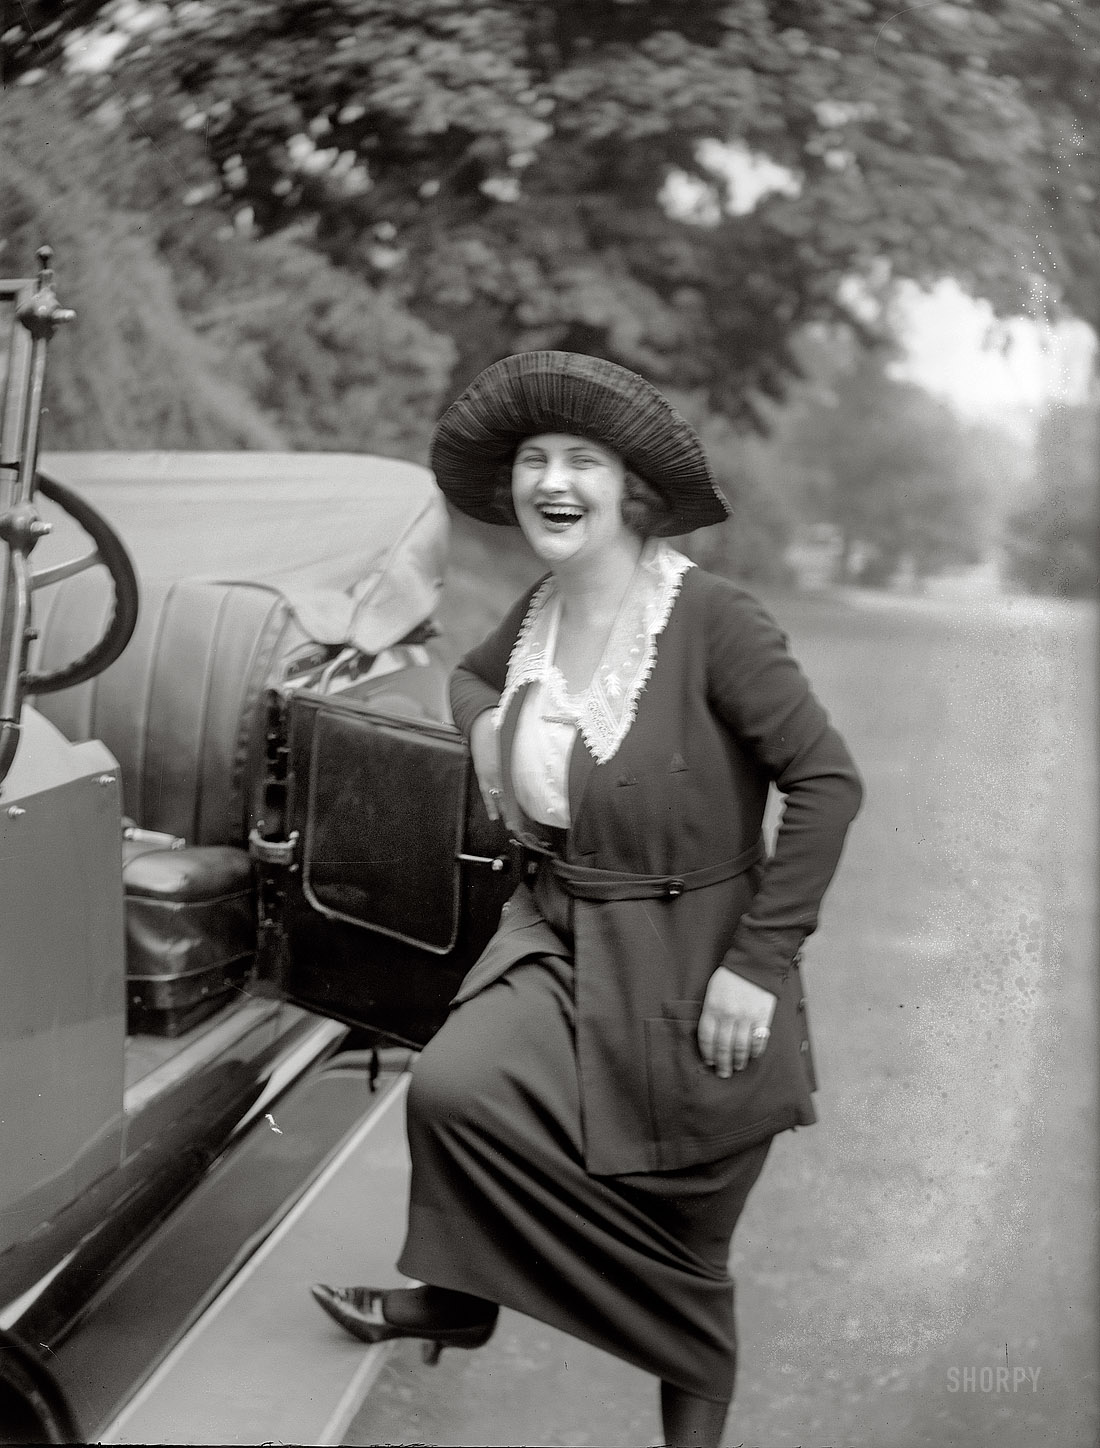 New York, 1920. "Young." One of dozens of photos of Ms. Young in the Bain archive. 5x7 glass negative, George Grantham Bain Collection. View full size.